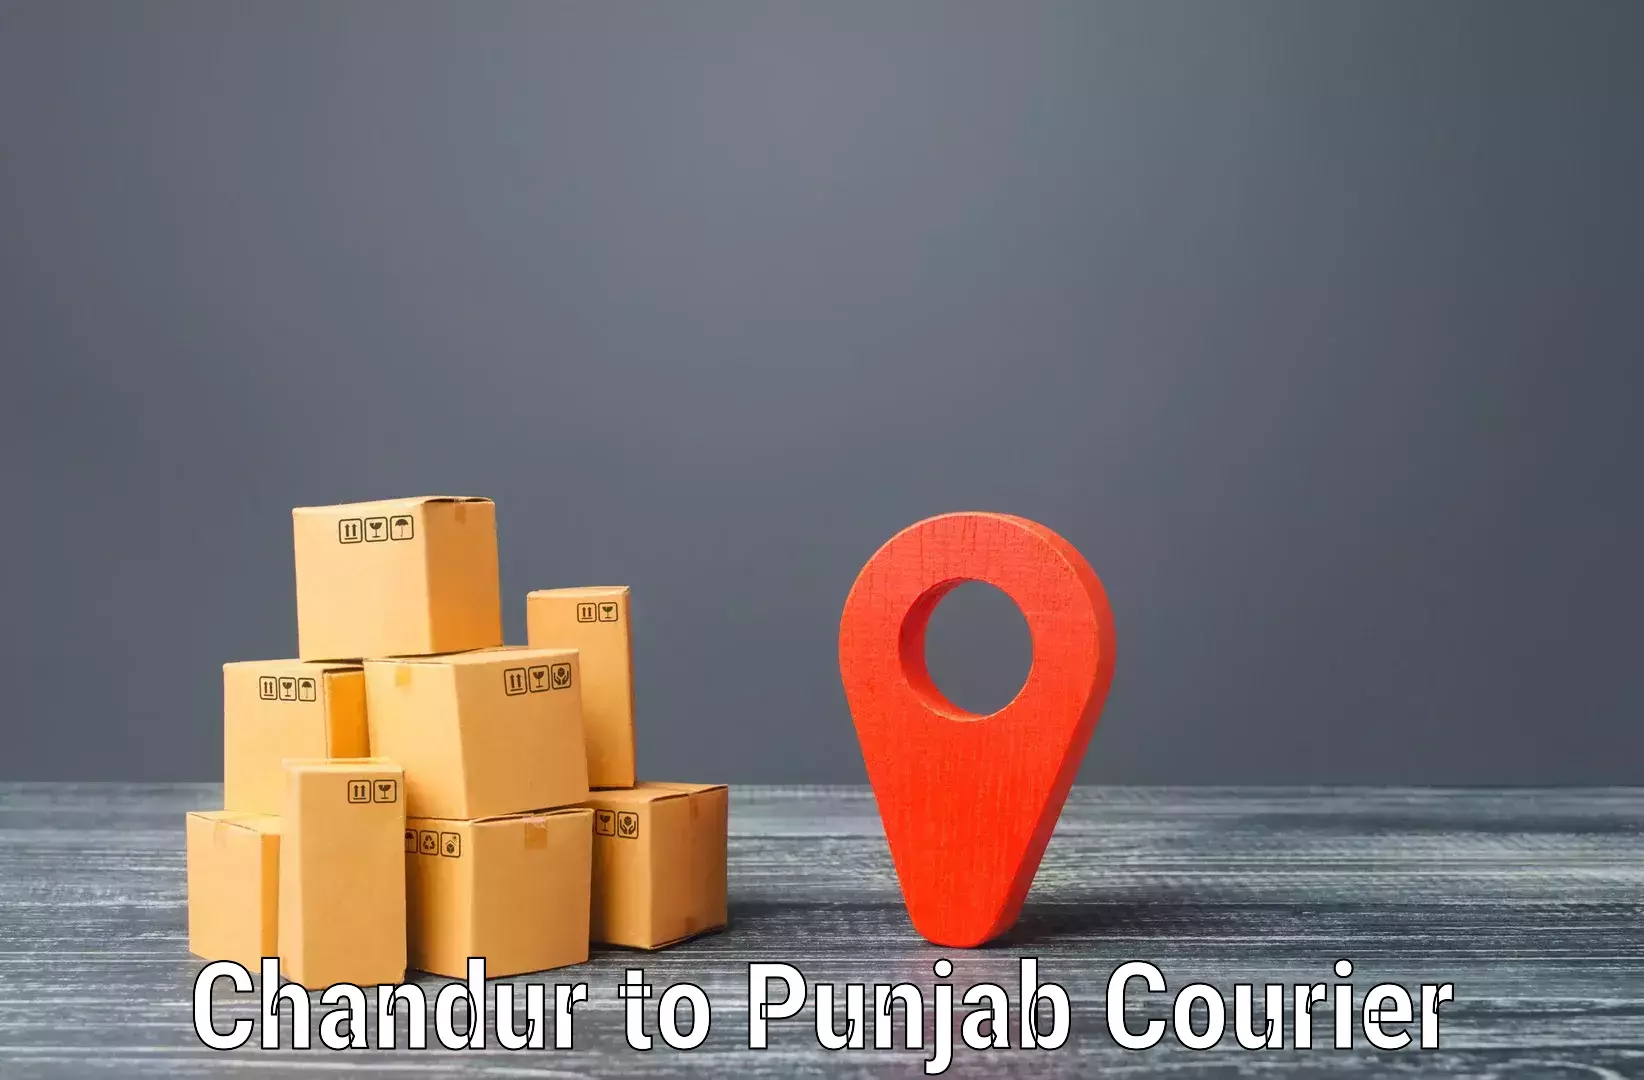 Large-scale shipping solutions Chandur to Dinanagar